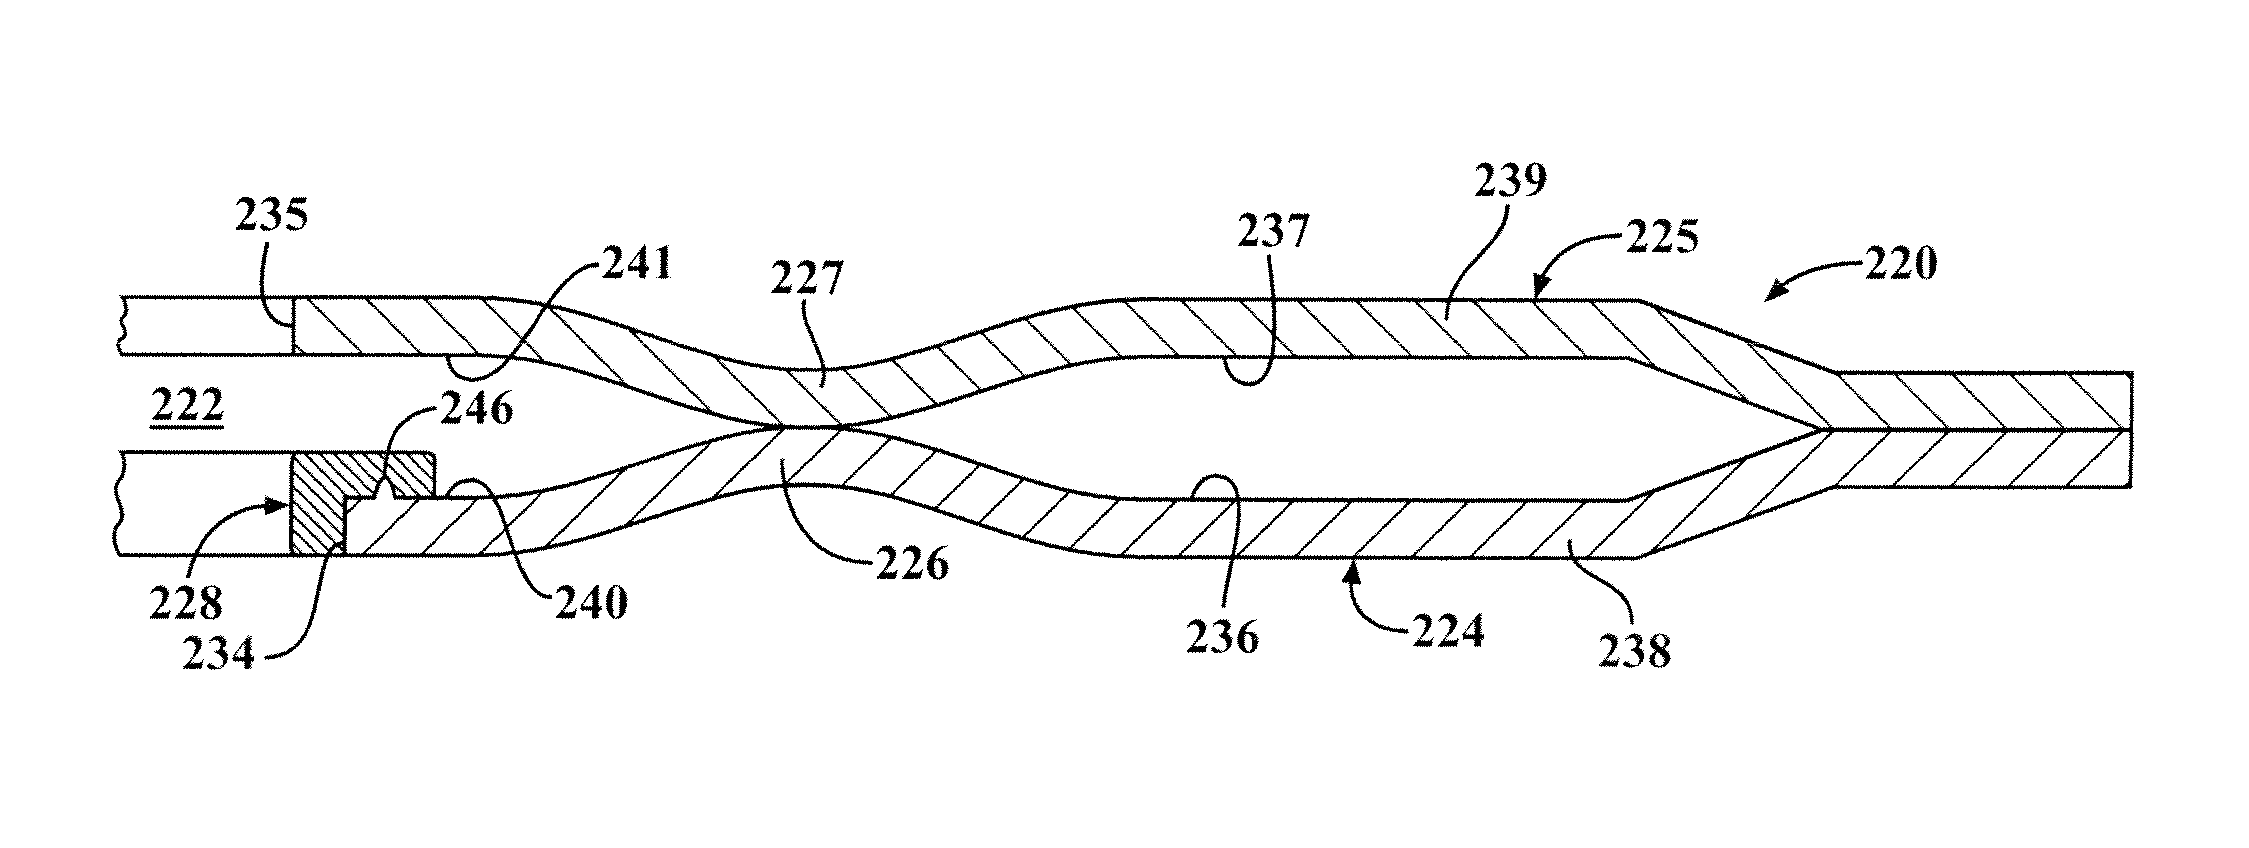 Static gasket with wire compression limiter